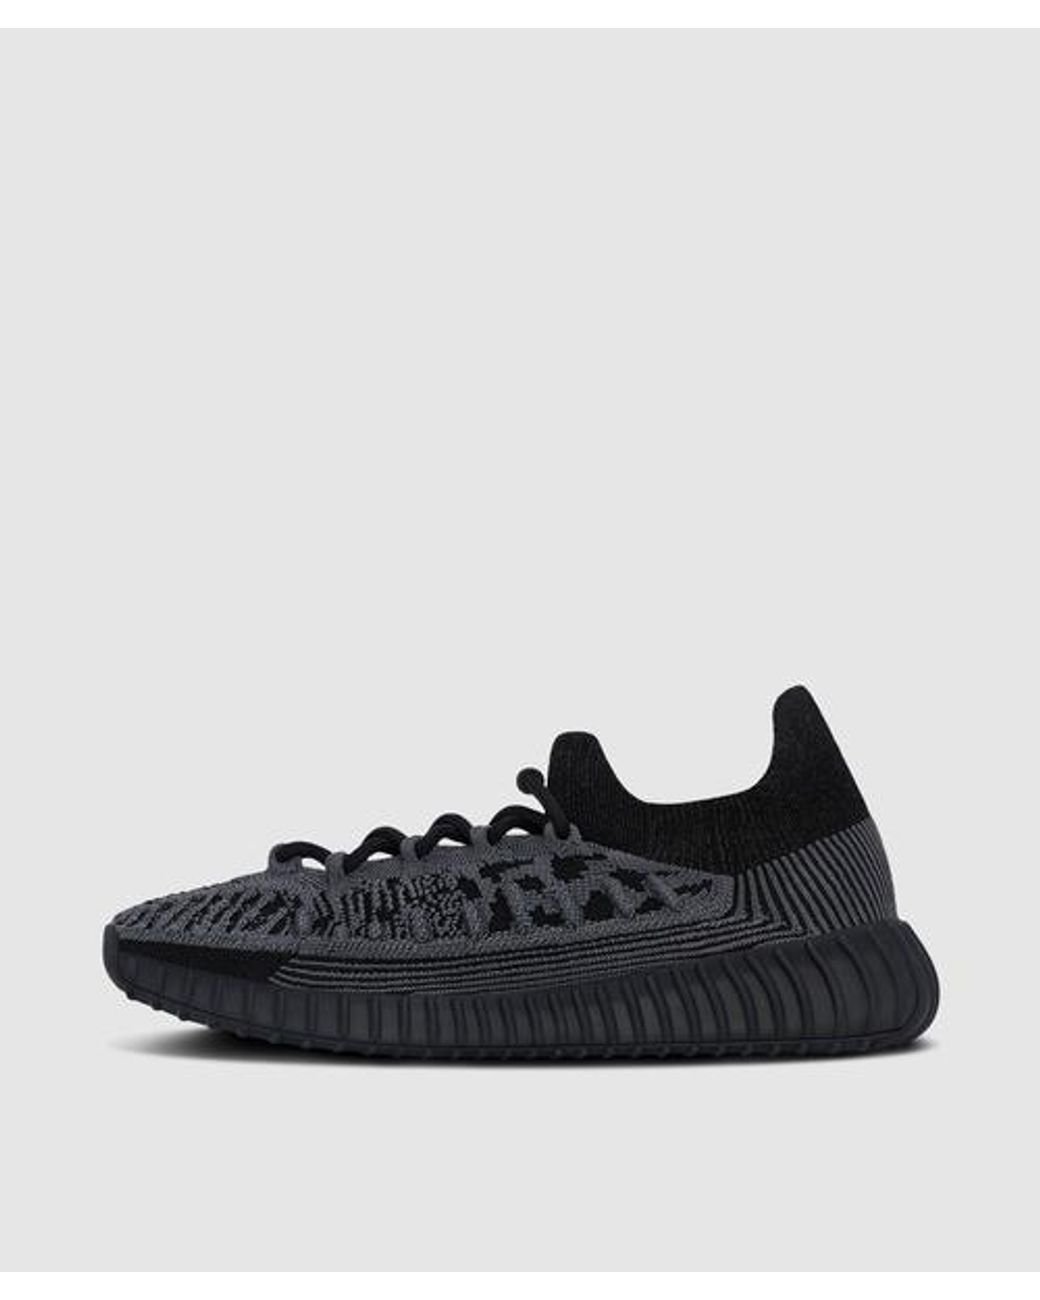 adidas Yeezy Boost 350 V2 Compact in Black for |